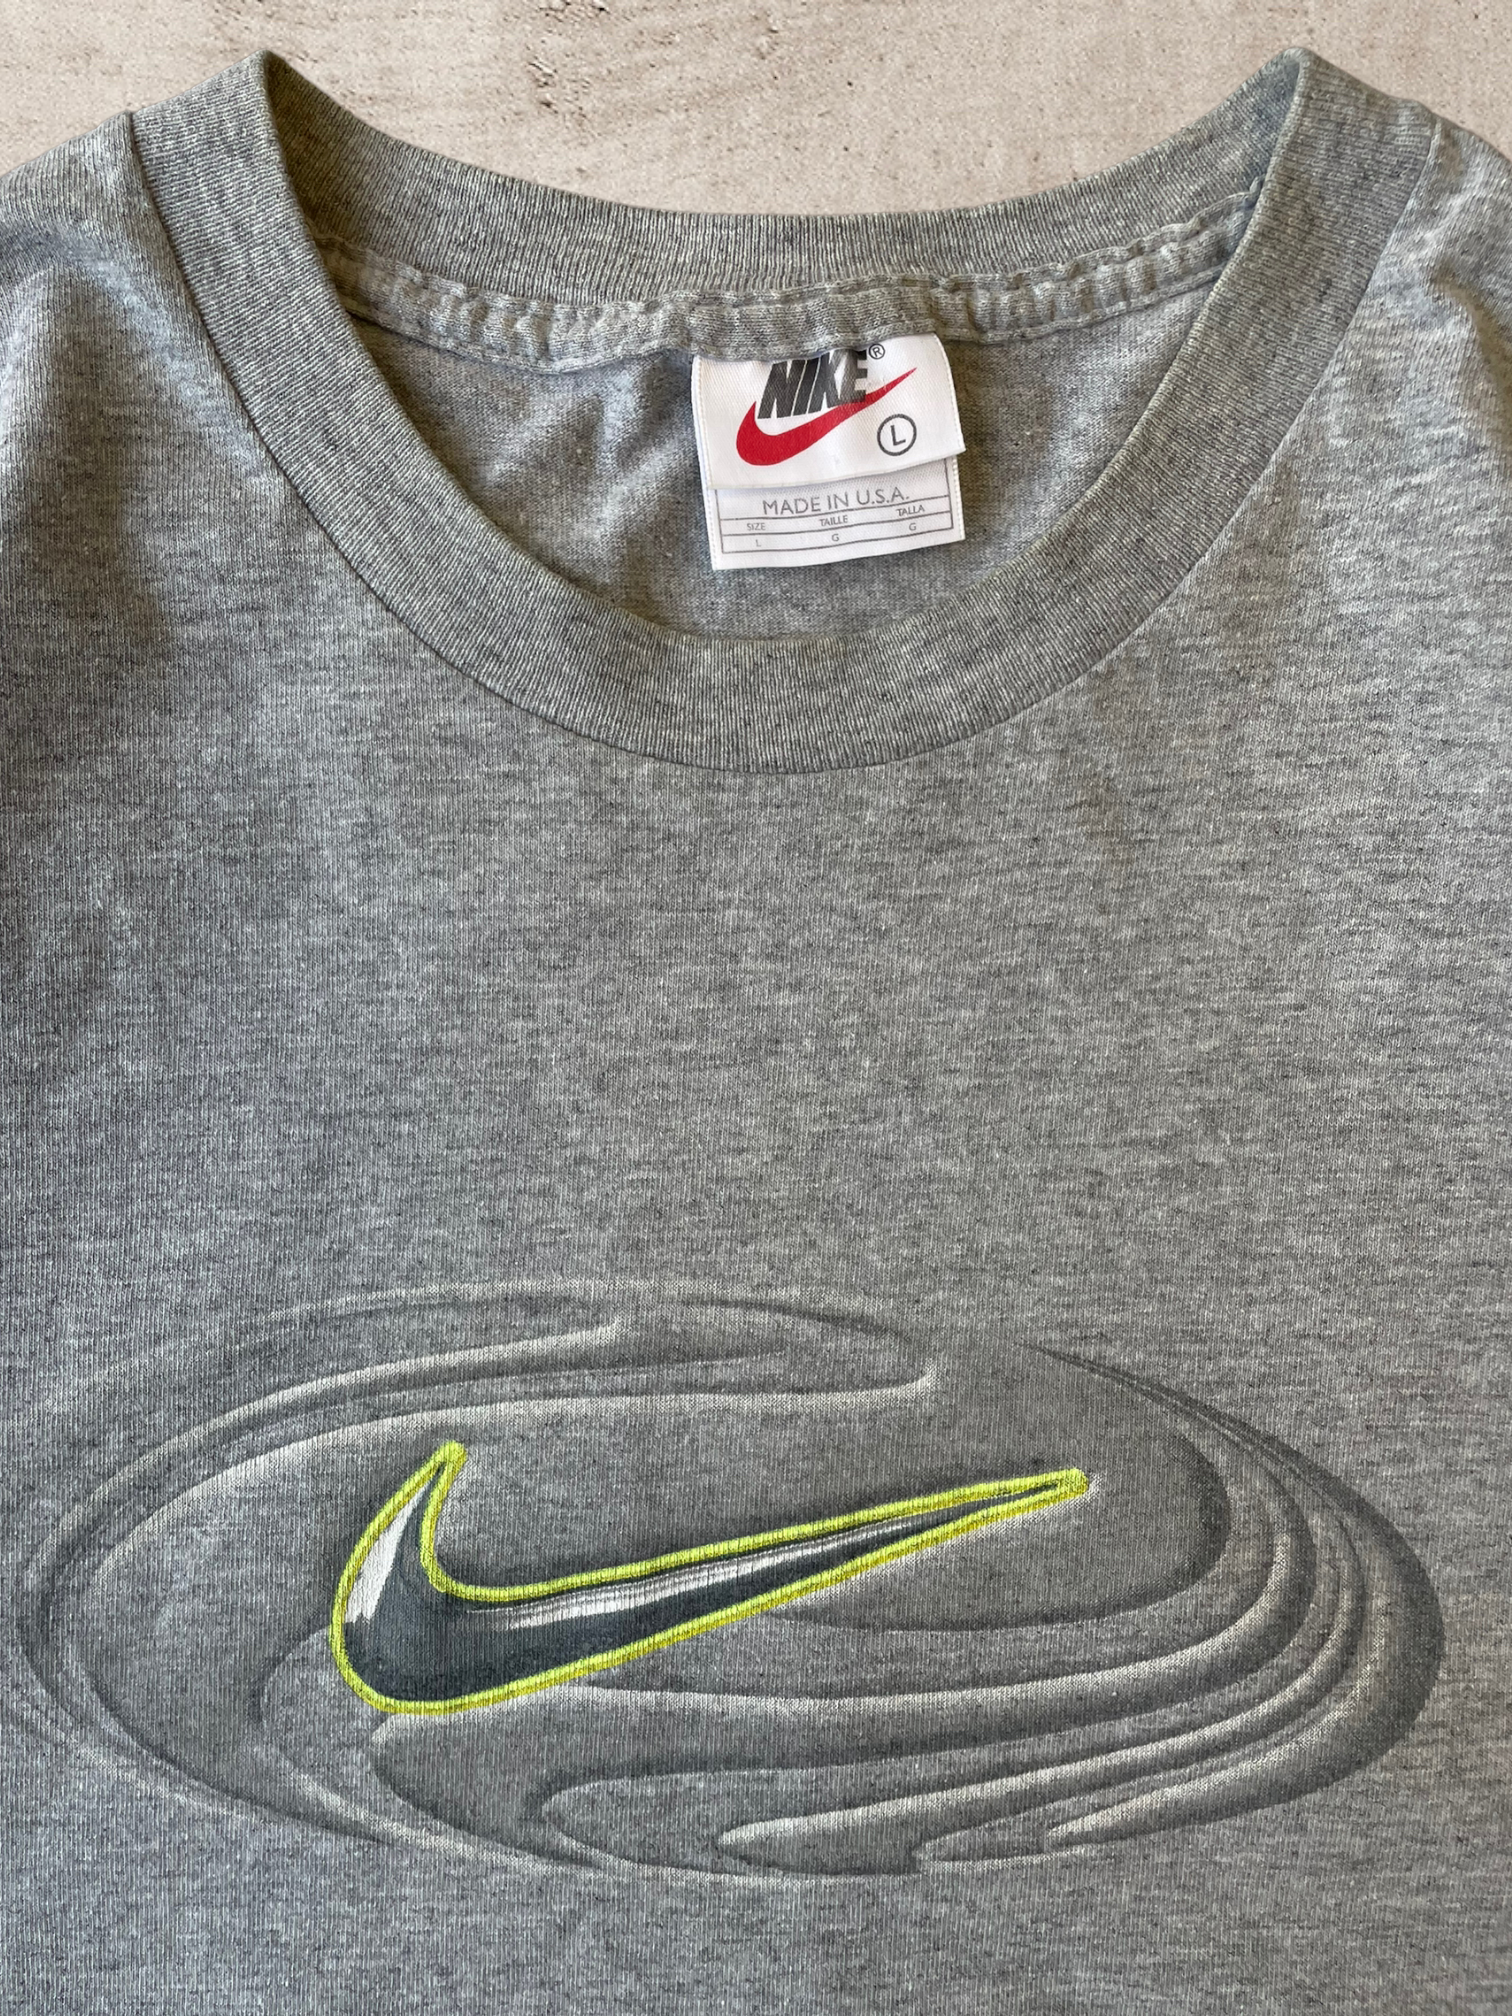 90s Nike Graphic T-Shirts - Large